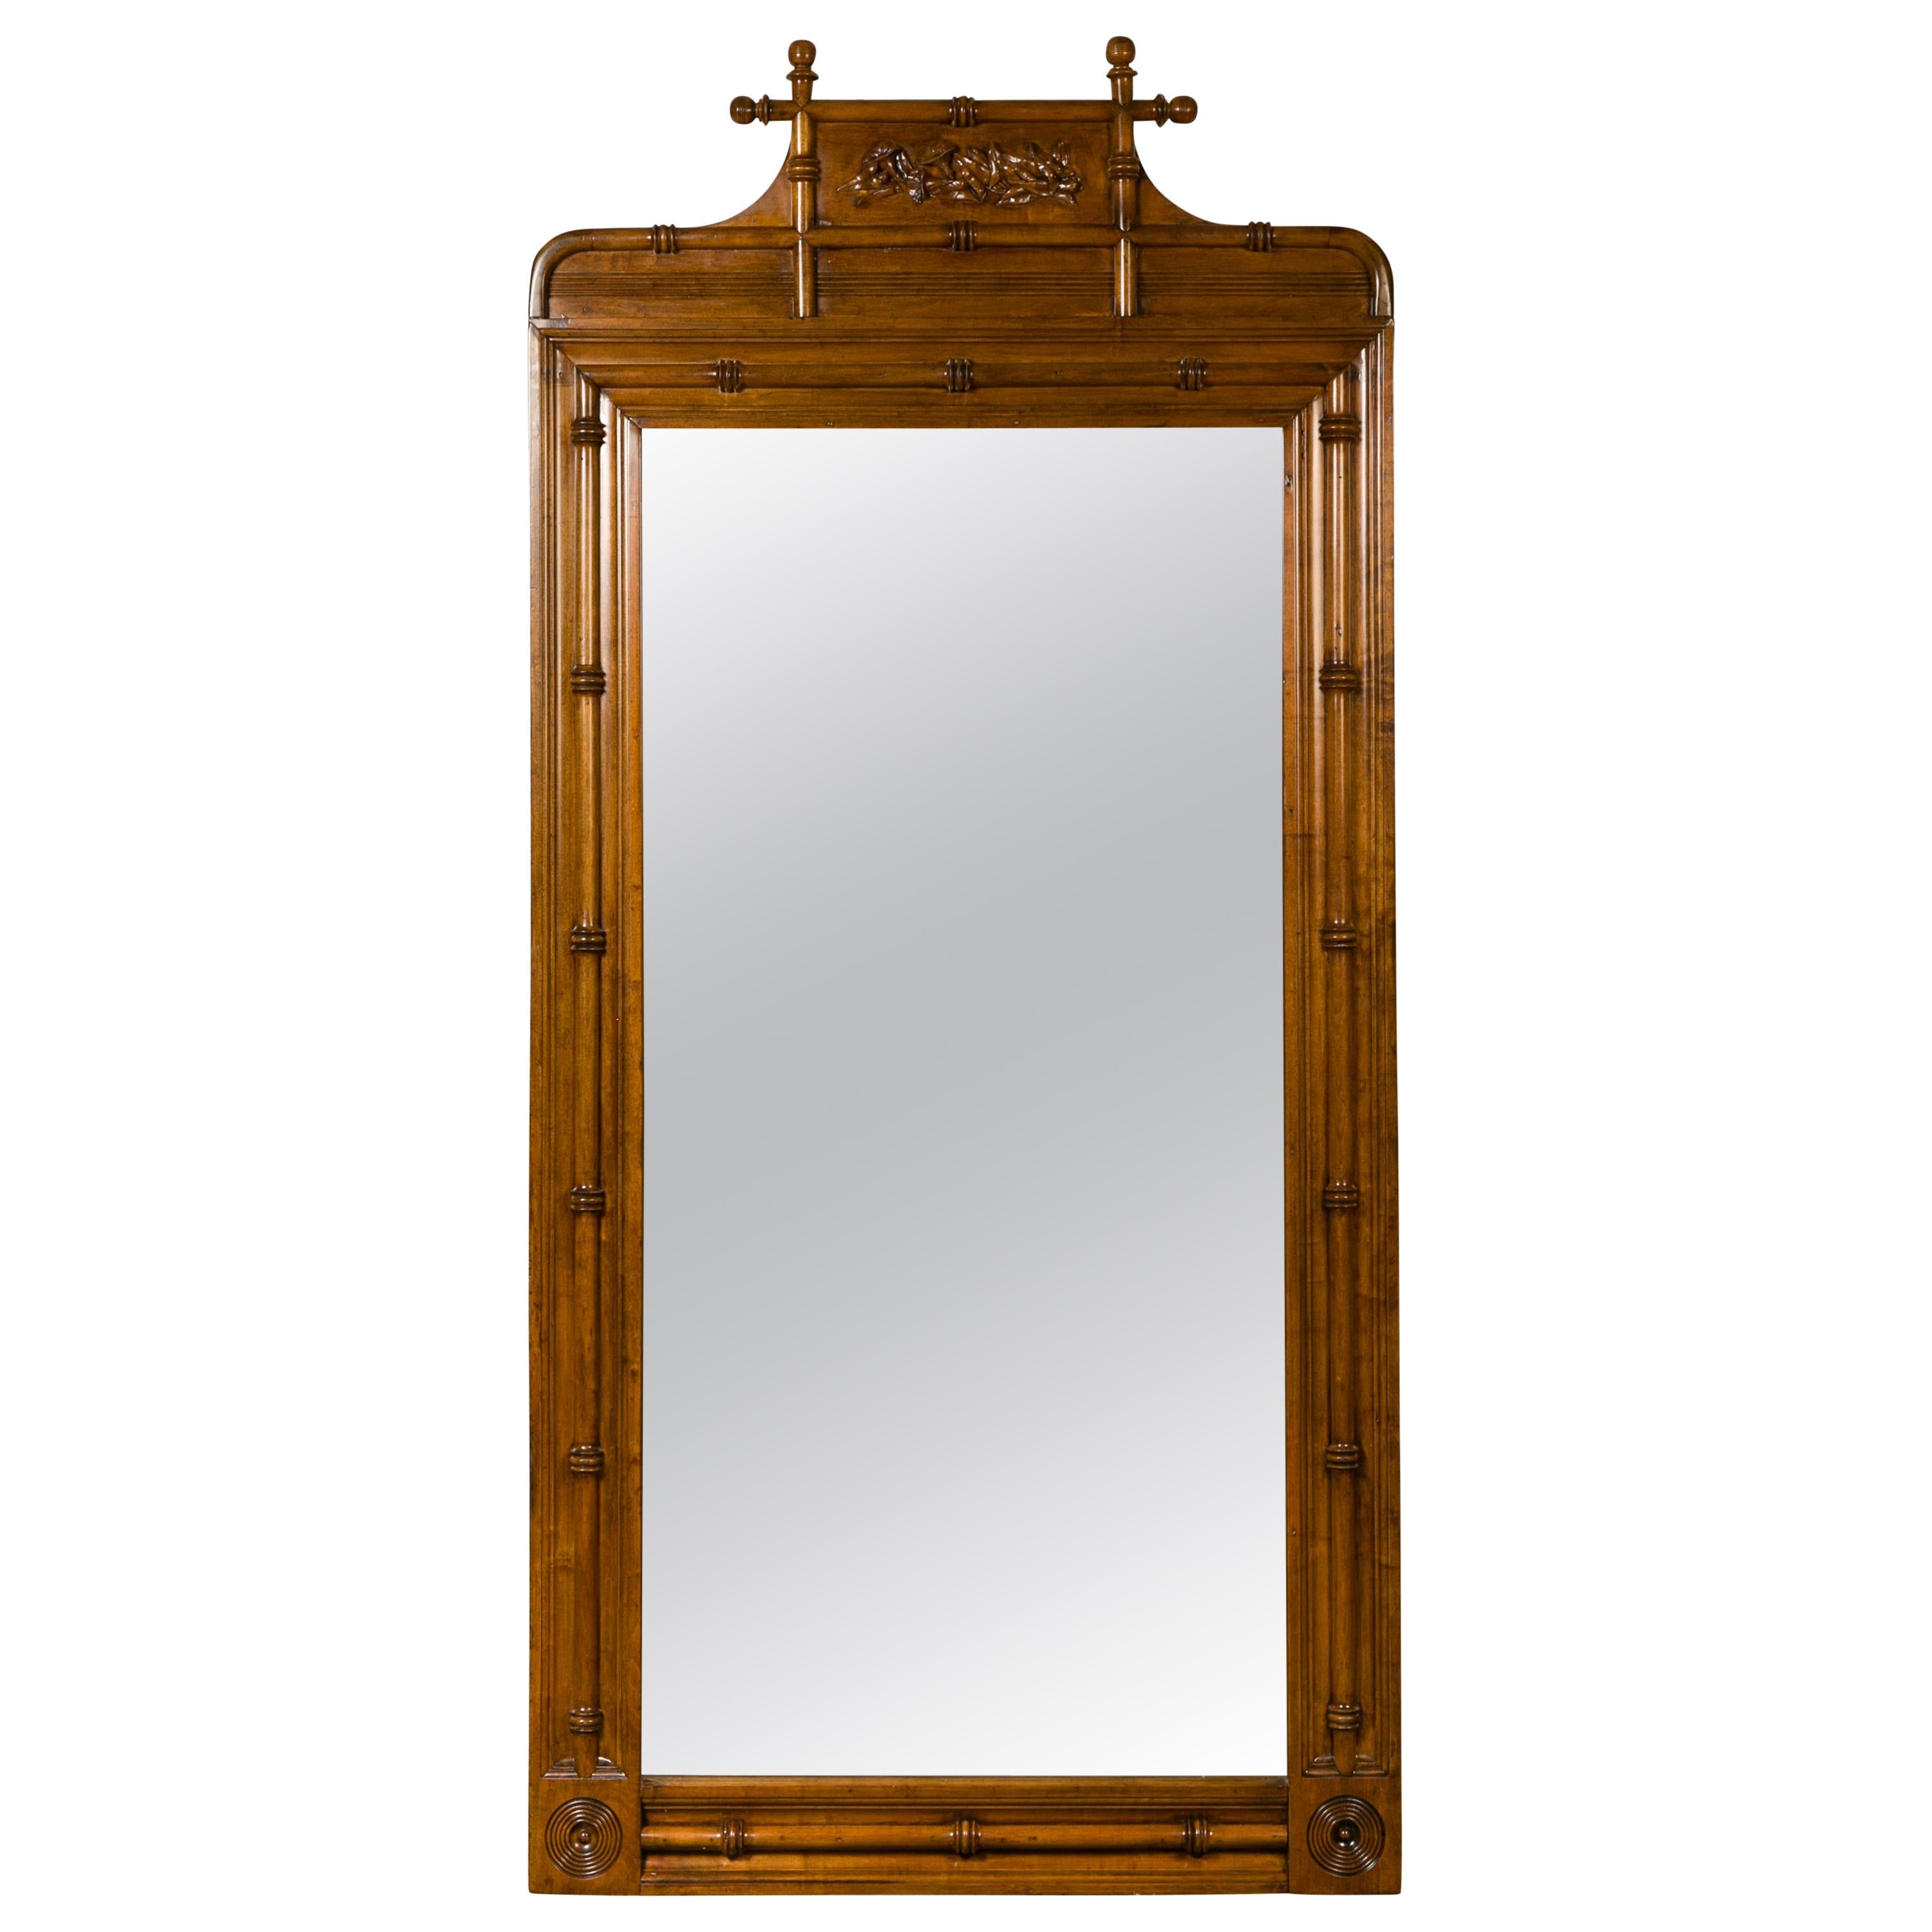 Large English Faux-Bamboo Walnut Mirror Made of 1900s Doors with Carved Ivy